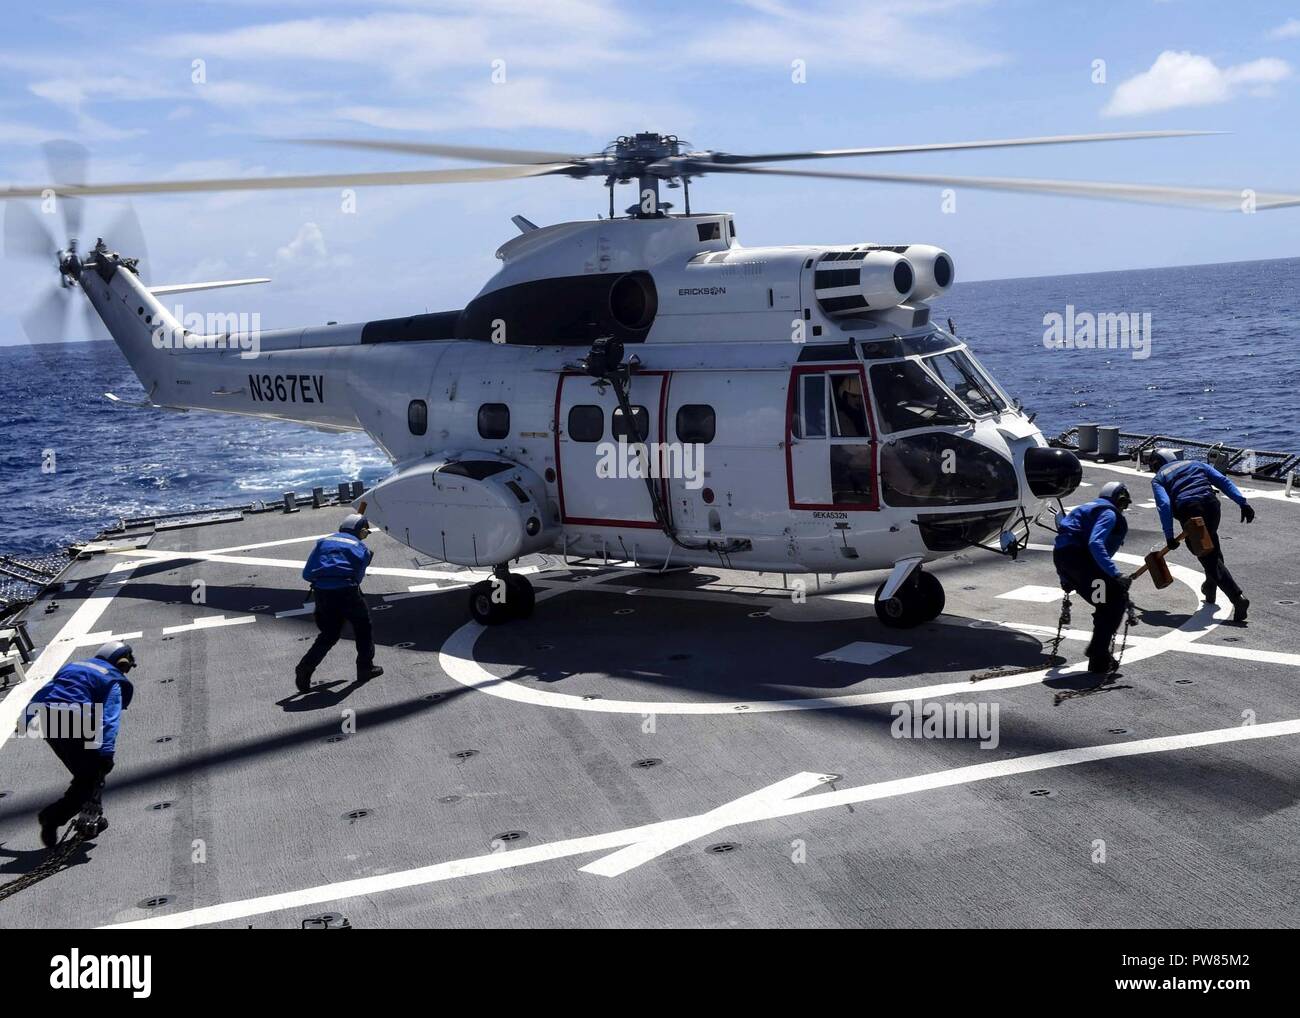 WATERS NEAR GUAM (Sept. 26, 2017) Sailors run out to chalk and chain an SA-330J Puma helicopter, assigned to USNS Amelia Earhart (T-AKE 6) on the flight deck of the Arleigh Burke-class guided-missile destroyer USS Benfold (DDG 65). Benfold is on patrol in the U.S. 7th Fleet area of operations in support of security and stability in the Indo-Asia-Pacific. Stock Photo